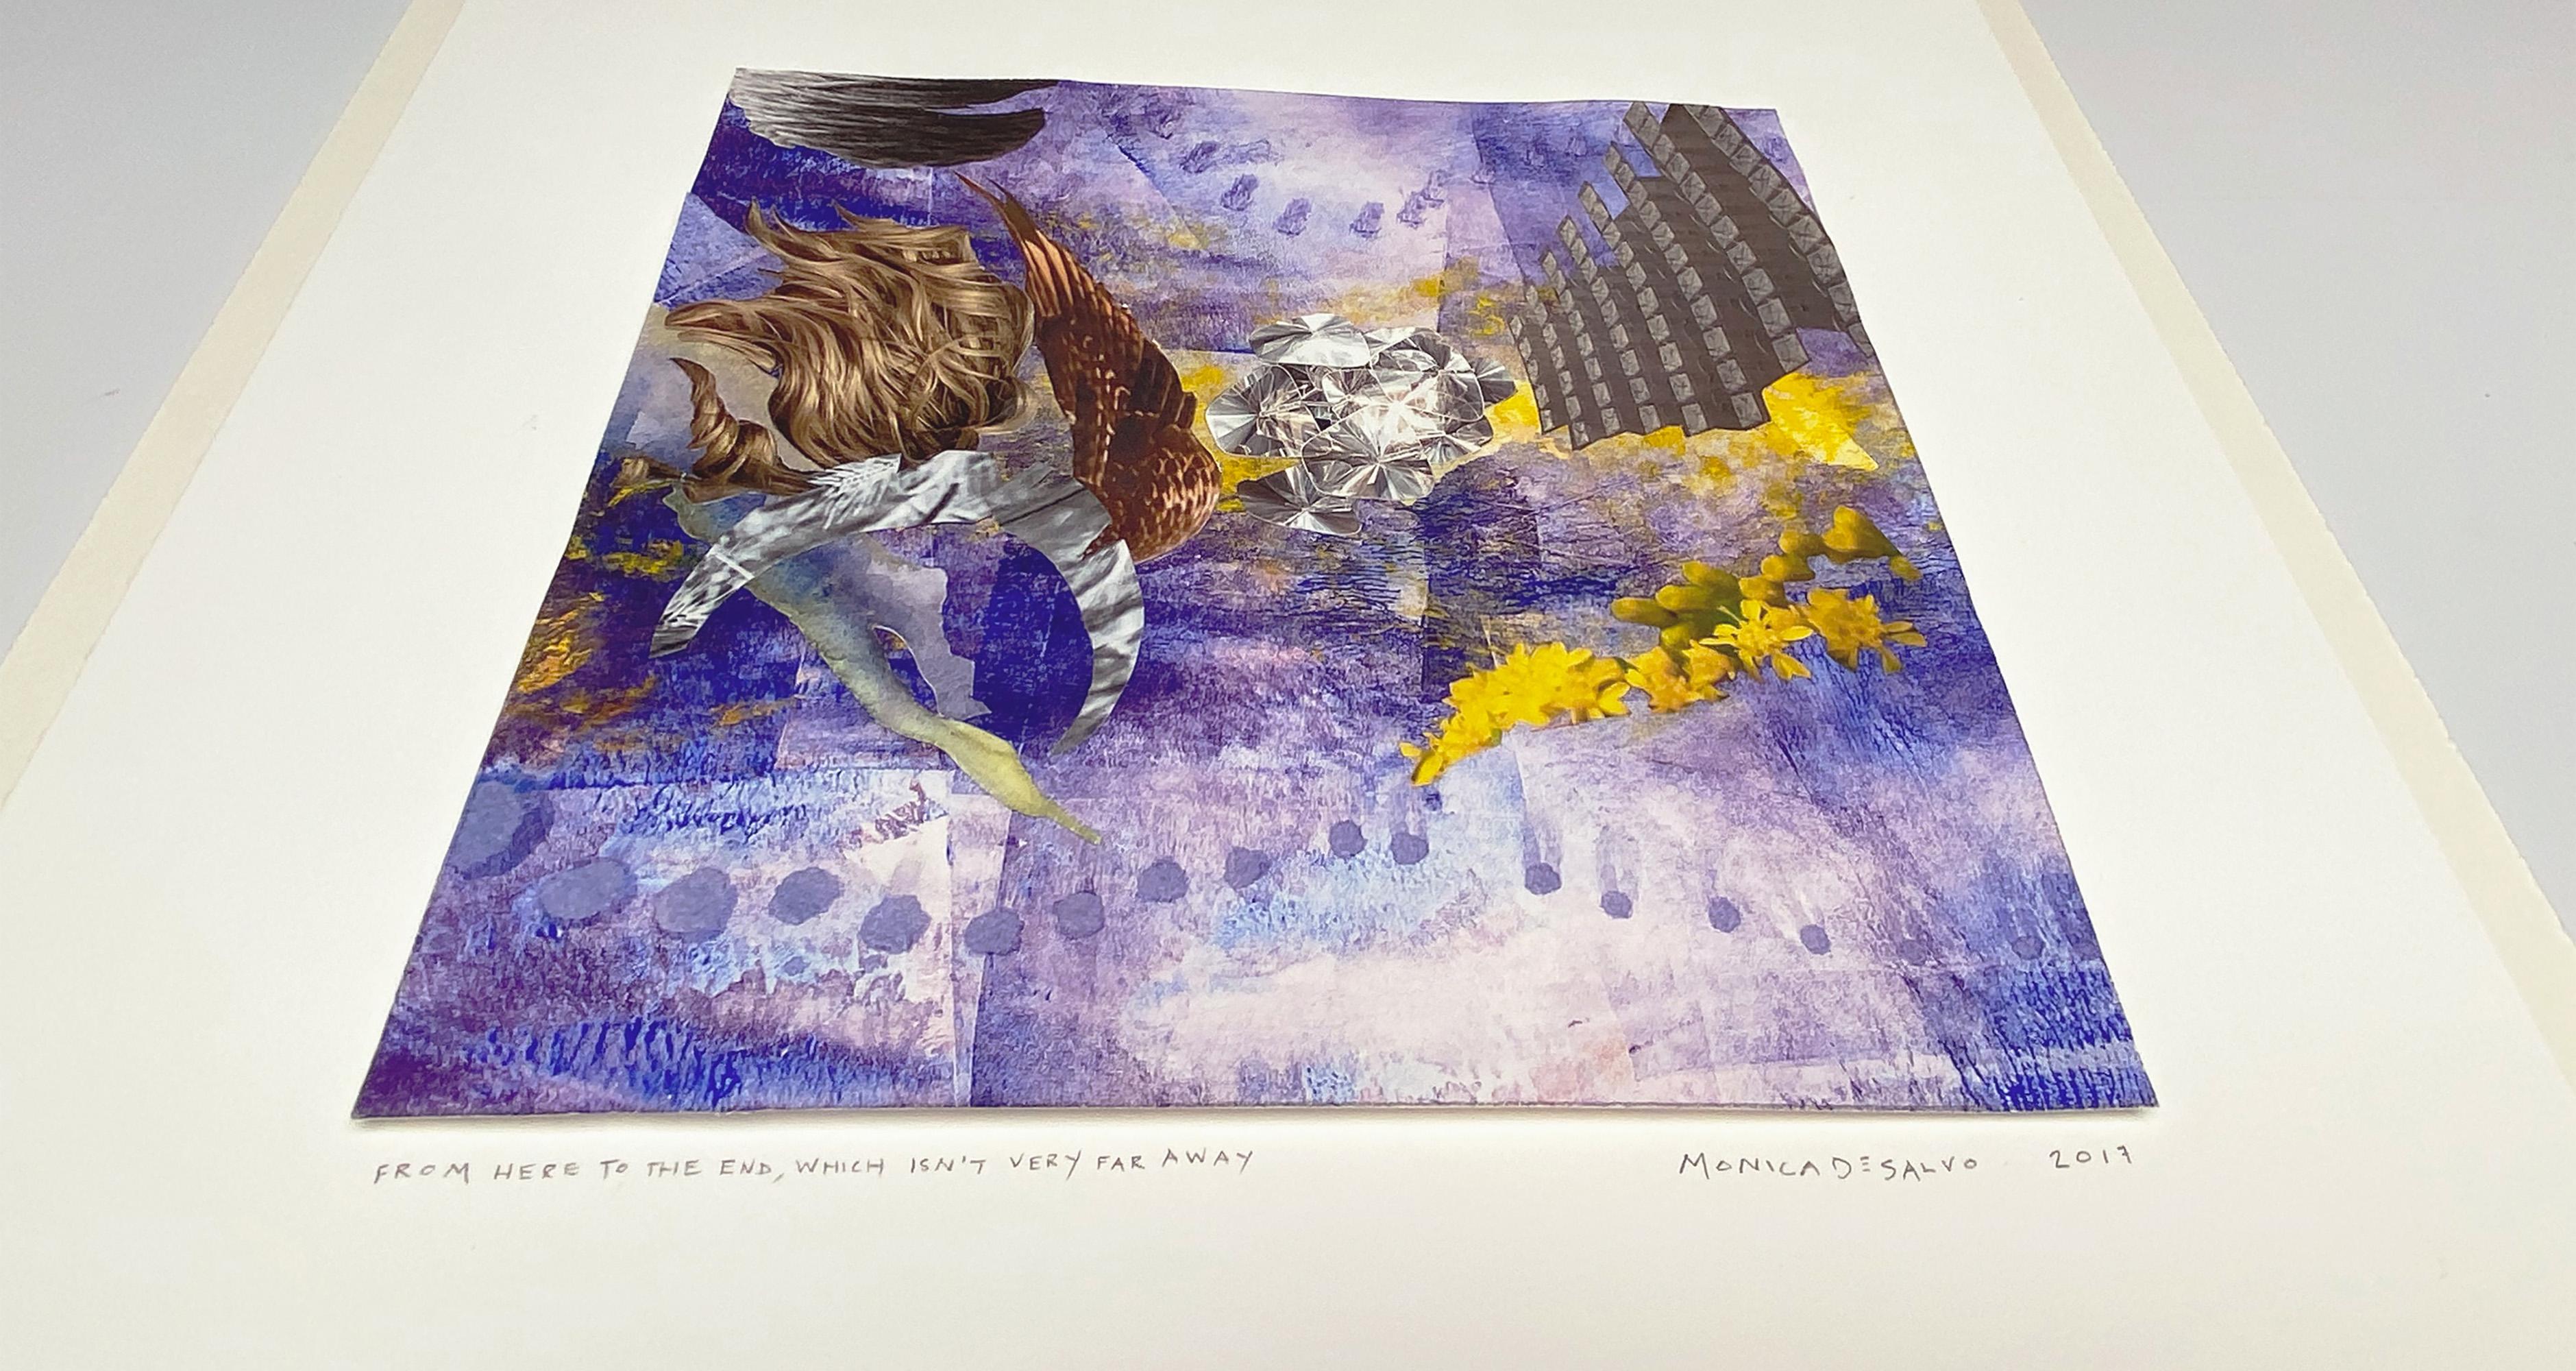 Monica DeSalvo’s “From here to the end, which isn’t very far away” is a 20 x 16 inch surreal collage on an acrylic Gelli plate monotype on paper. Golden hair, a bronze wing, clear gemstones, and yellow flowers blend into an abstract backdrop of